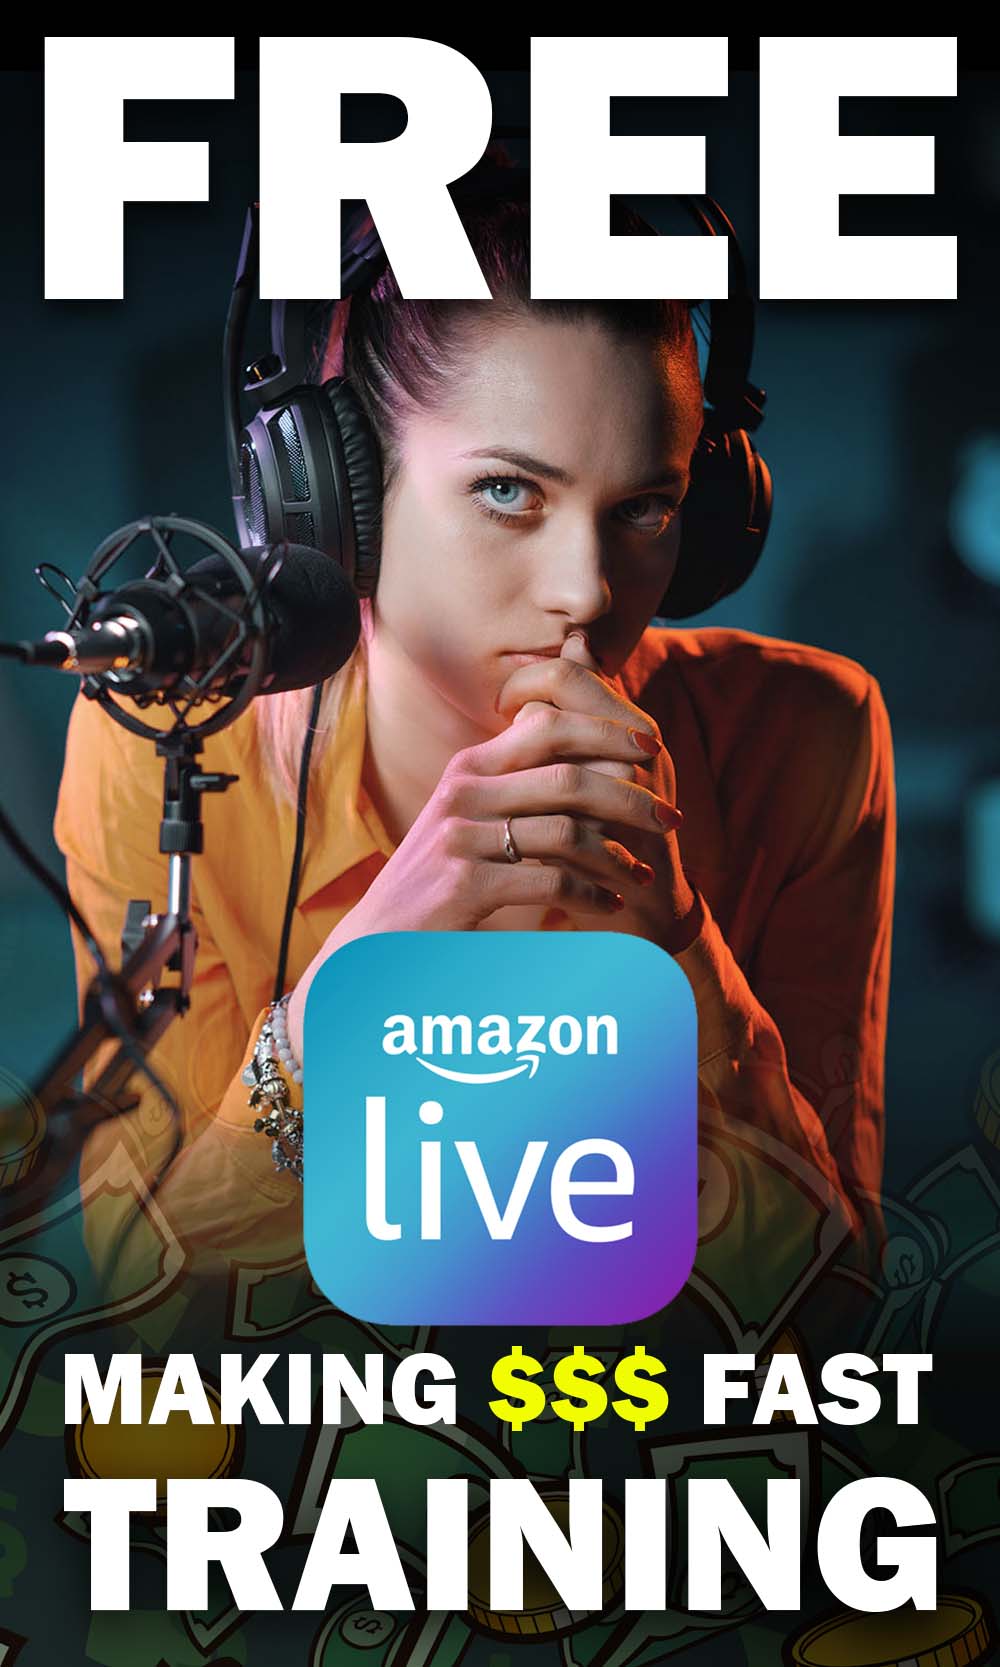 Learn How to Make Easy Money on Amazon Live - How to make Money on Amazon Live